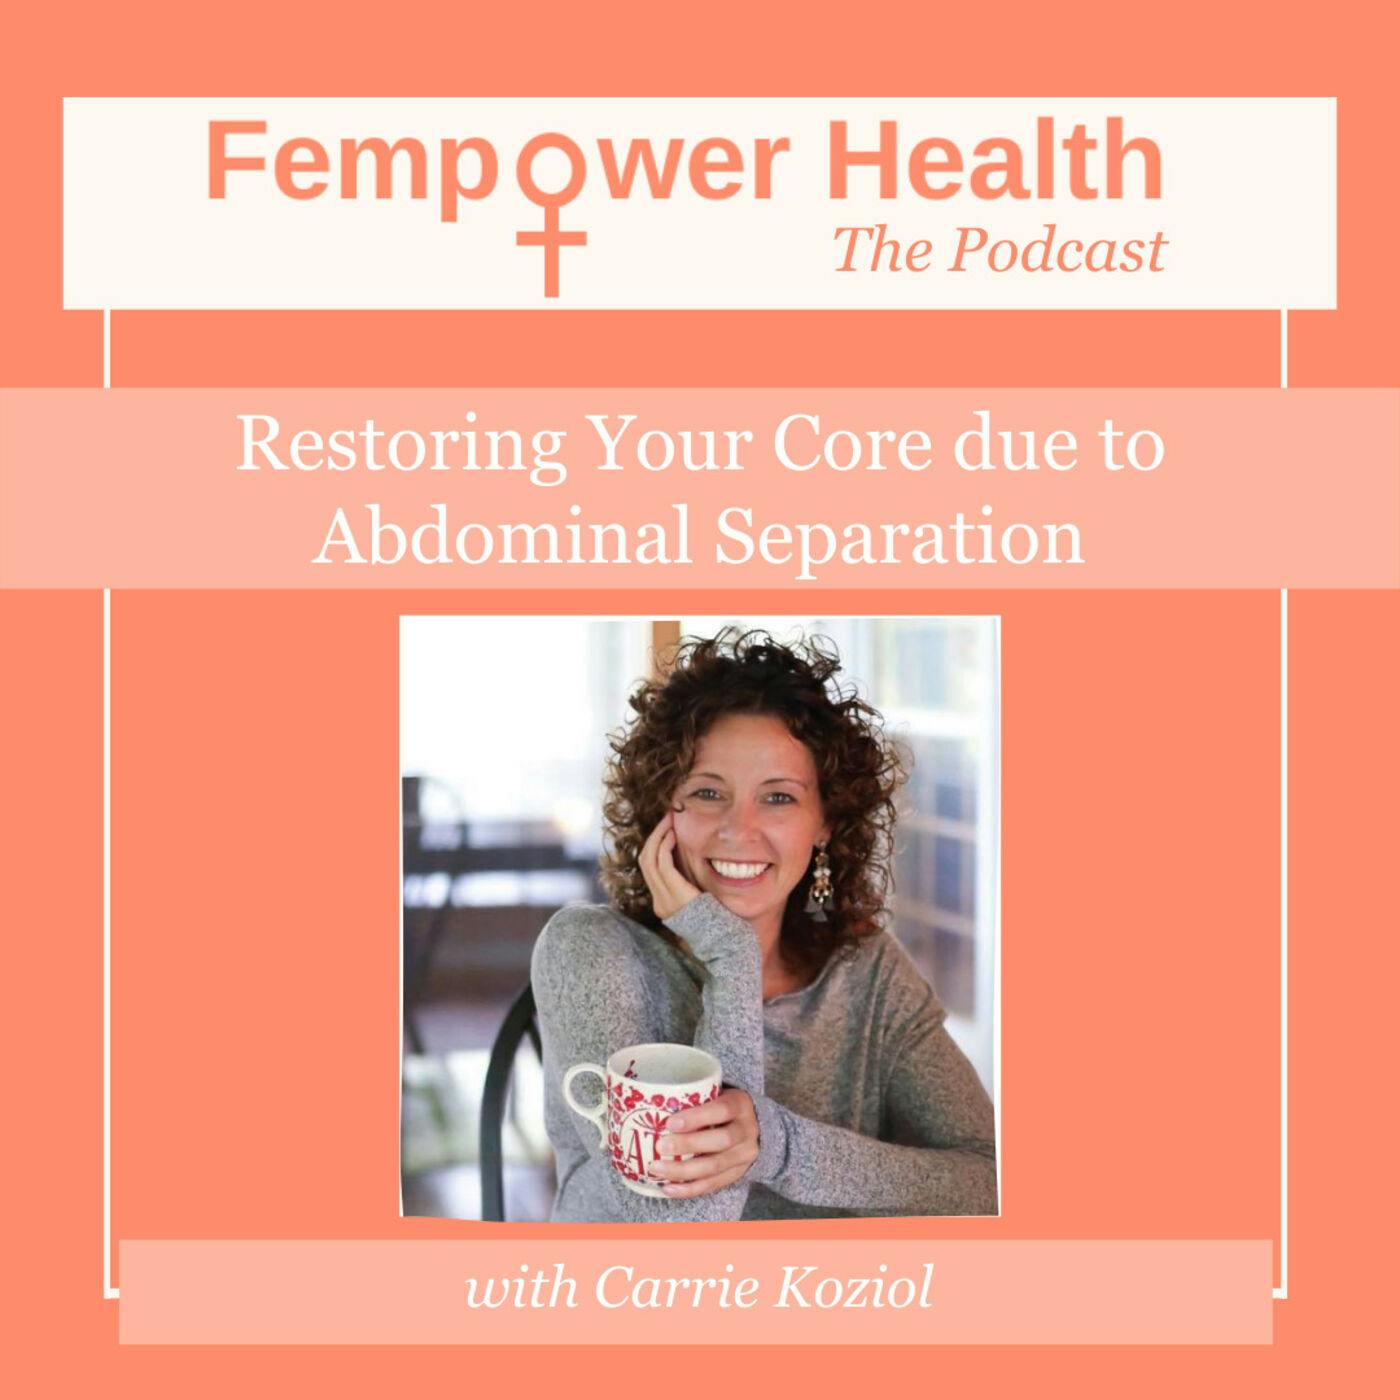 Restoring Your Core due to Abdominal Separation | Carrie Koziol